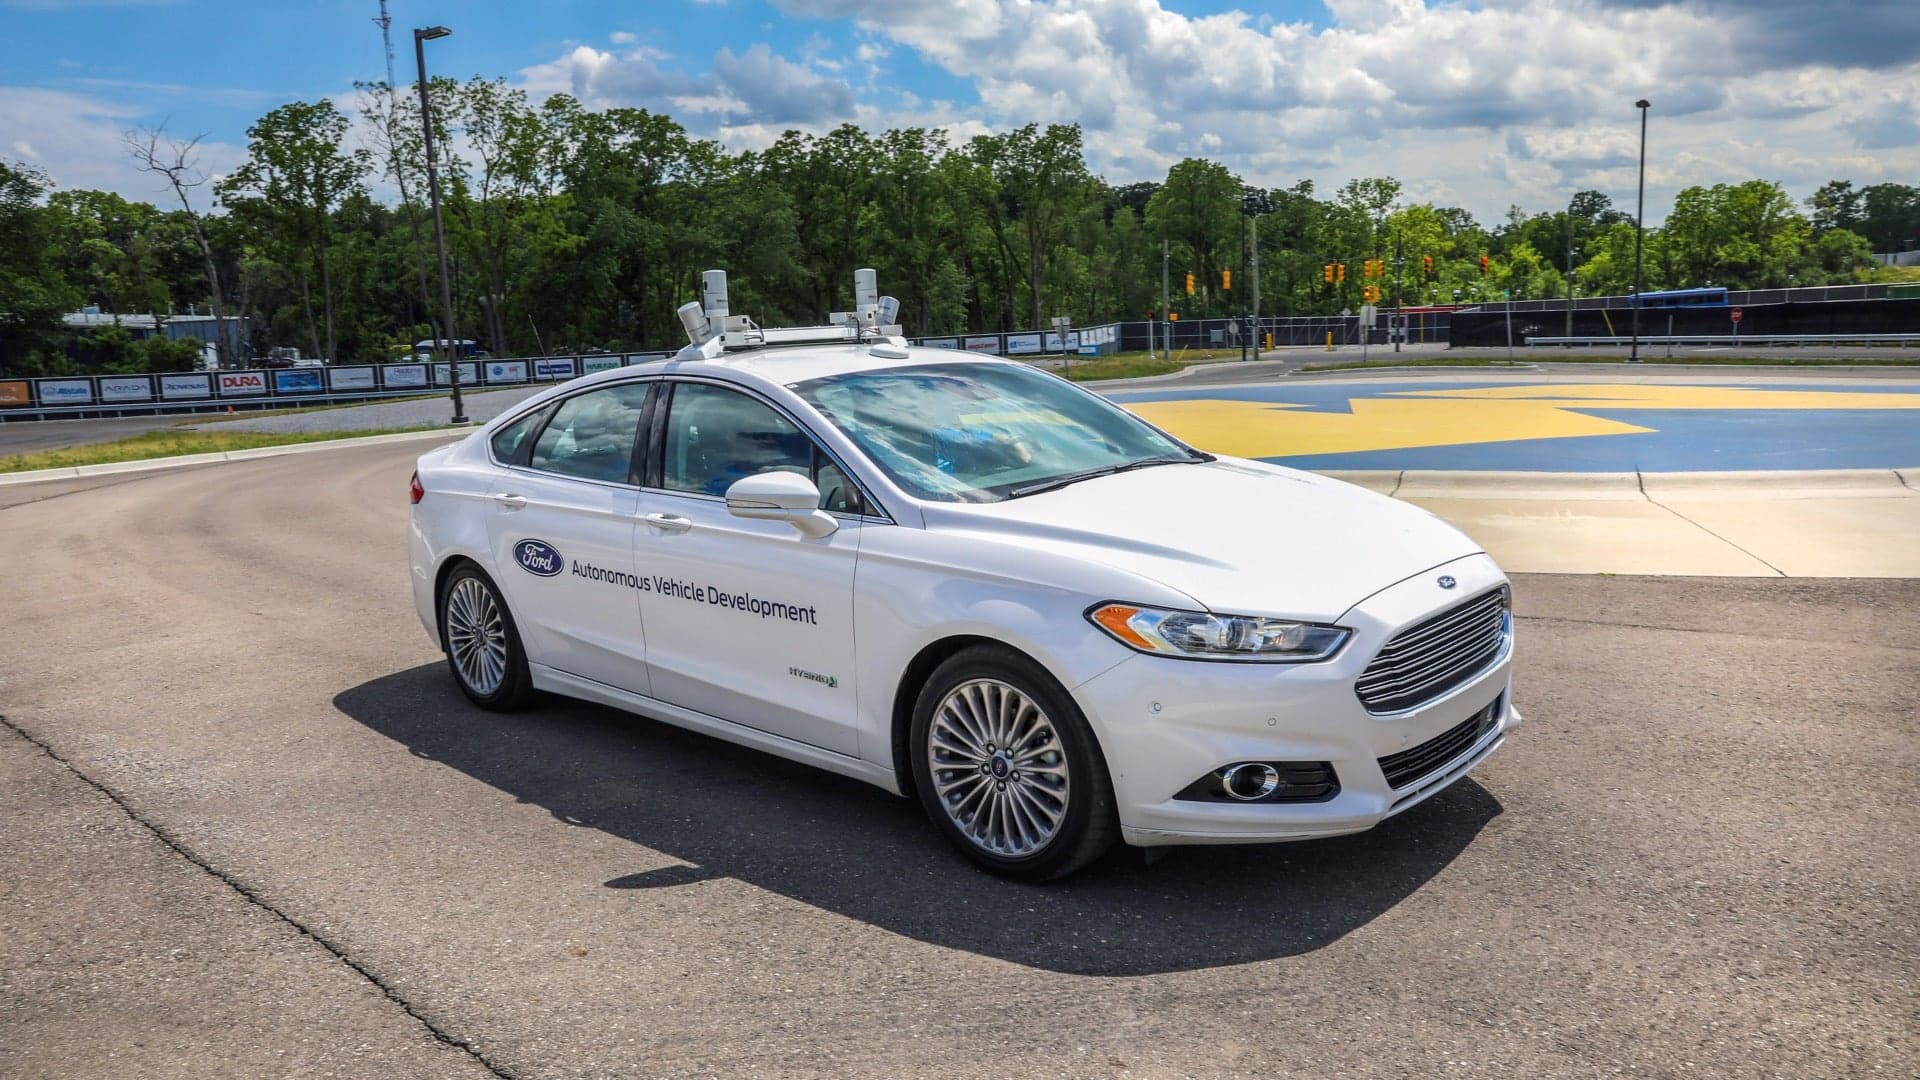 Ford’s Upcoming Self-Driving Car Will Be ‘Commercial Grade’